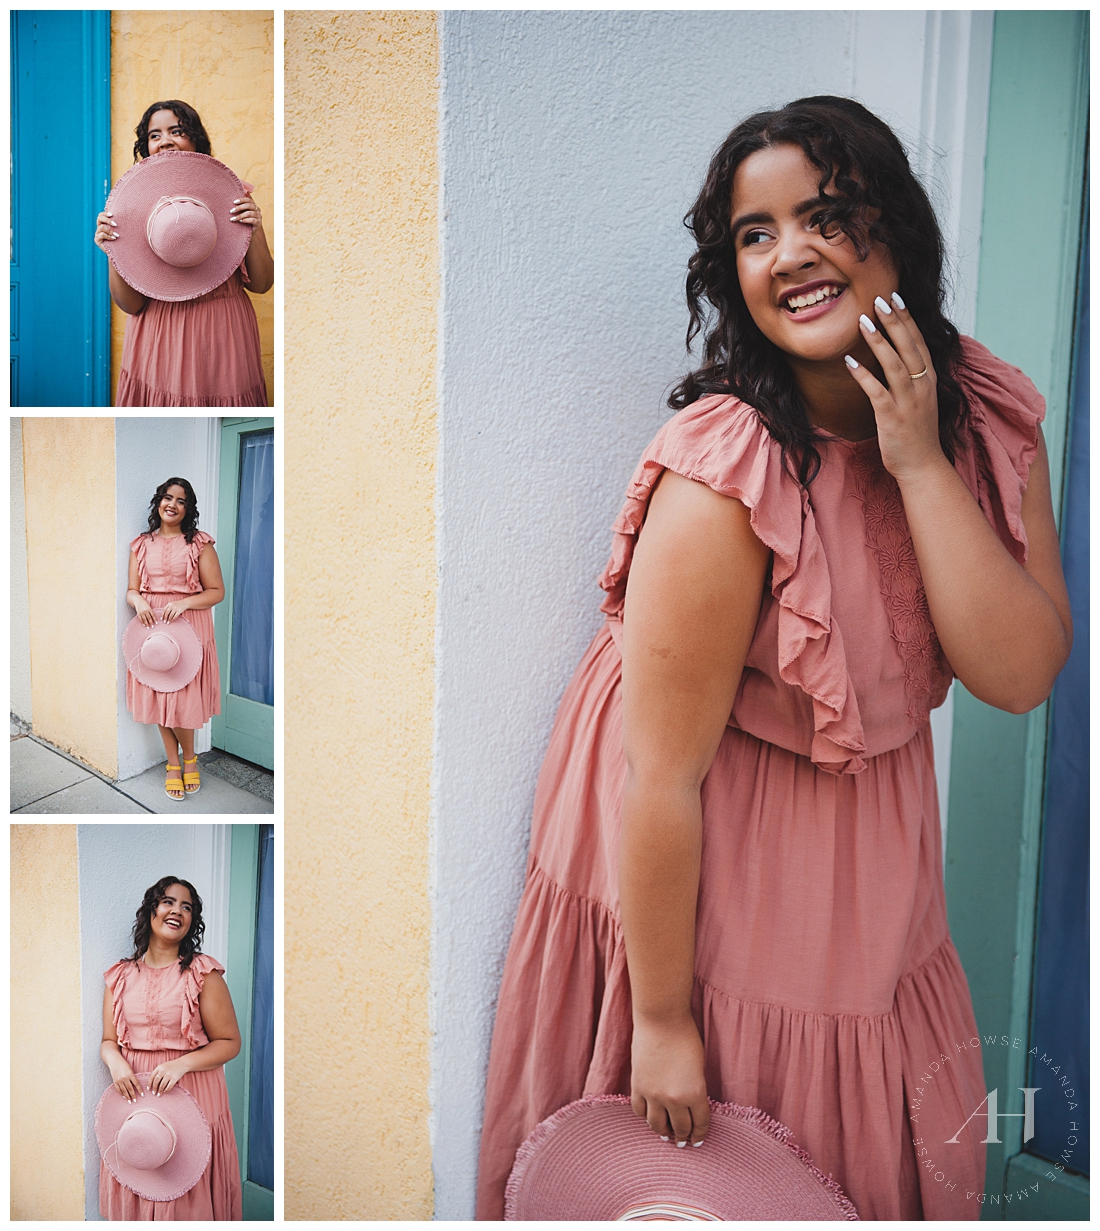 How to Style a Hat and Dress for Senior Portraits | Urban Tacoma Senior Portraits, Opera Alley Senior Portraits, Trendy Dresses and Accessories for Senior Portraits | Photographed by the Best Tacoma Senior Portrait Photographer Amanda Howse